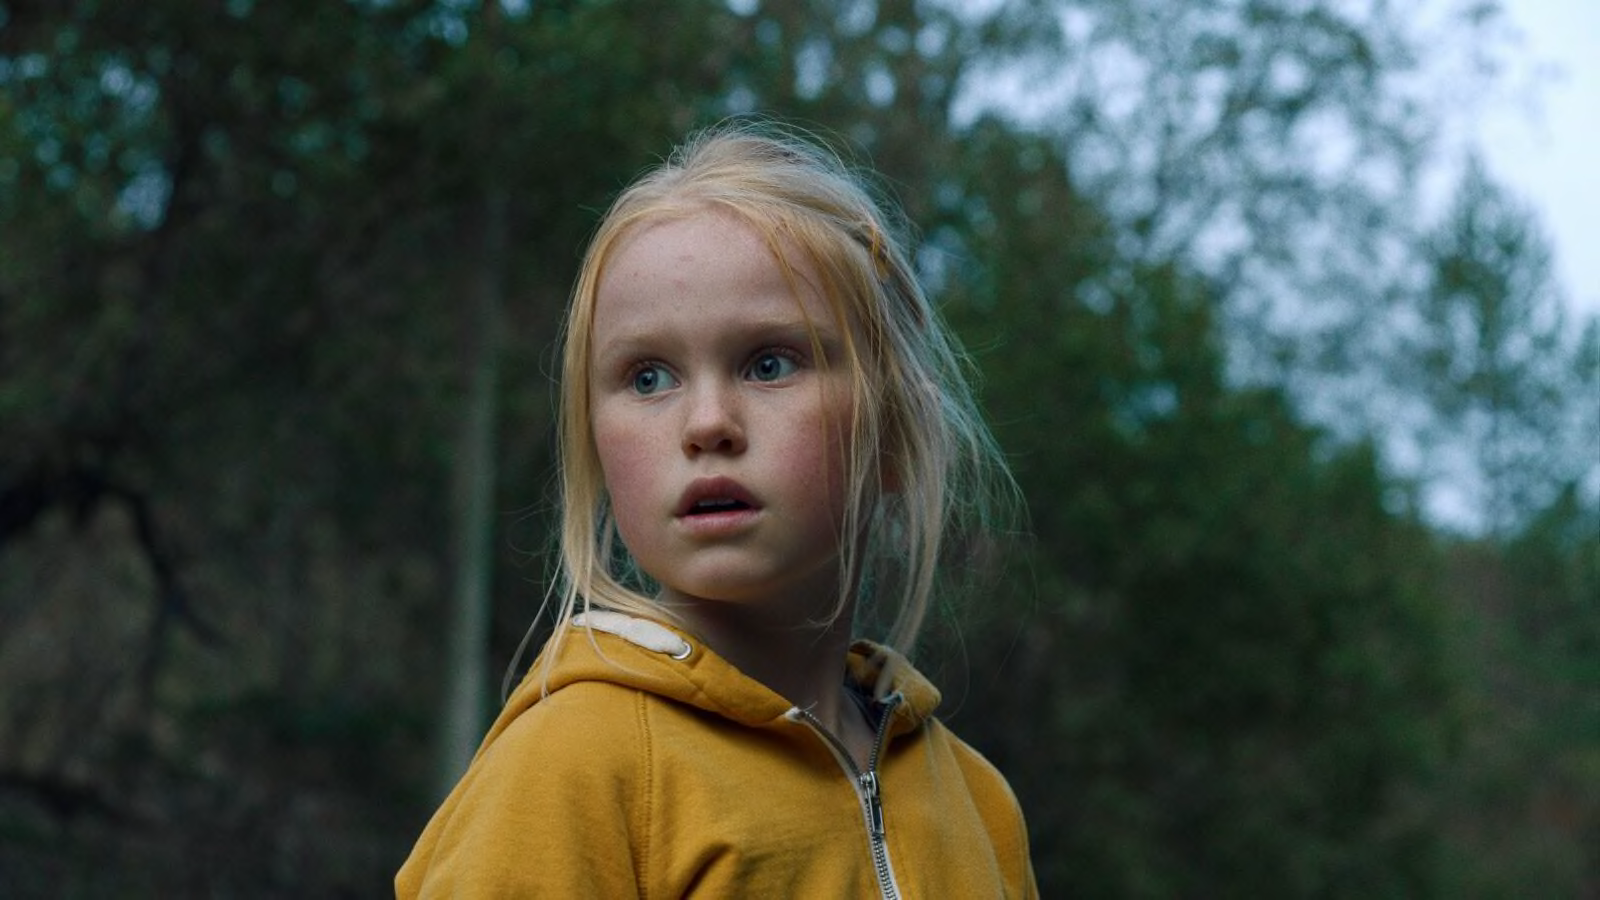 Ida in The Innocents looks scared in her yellow hoodie